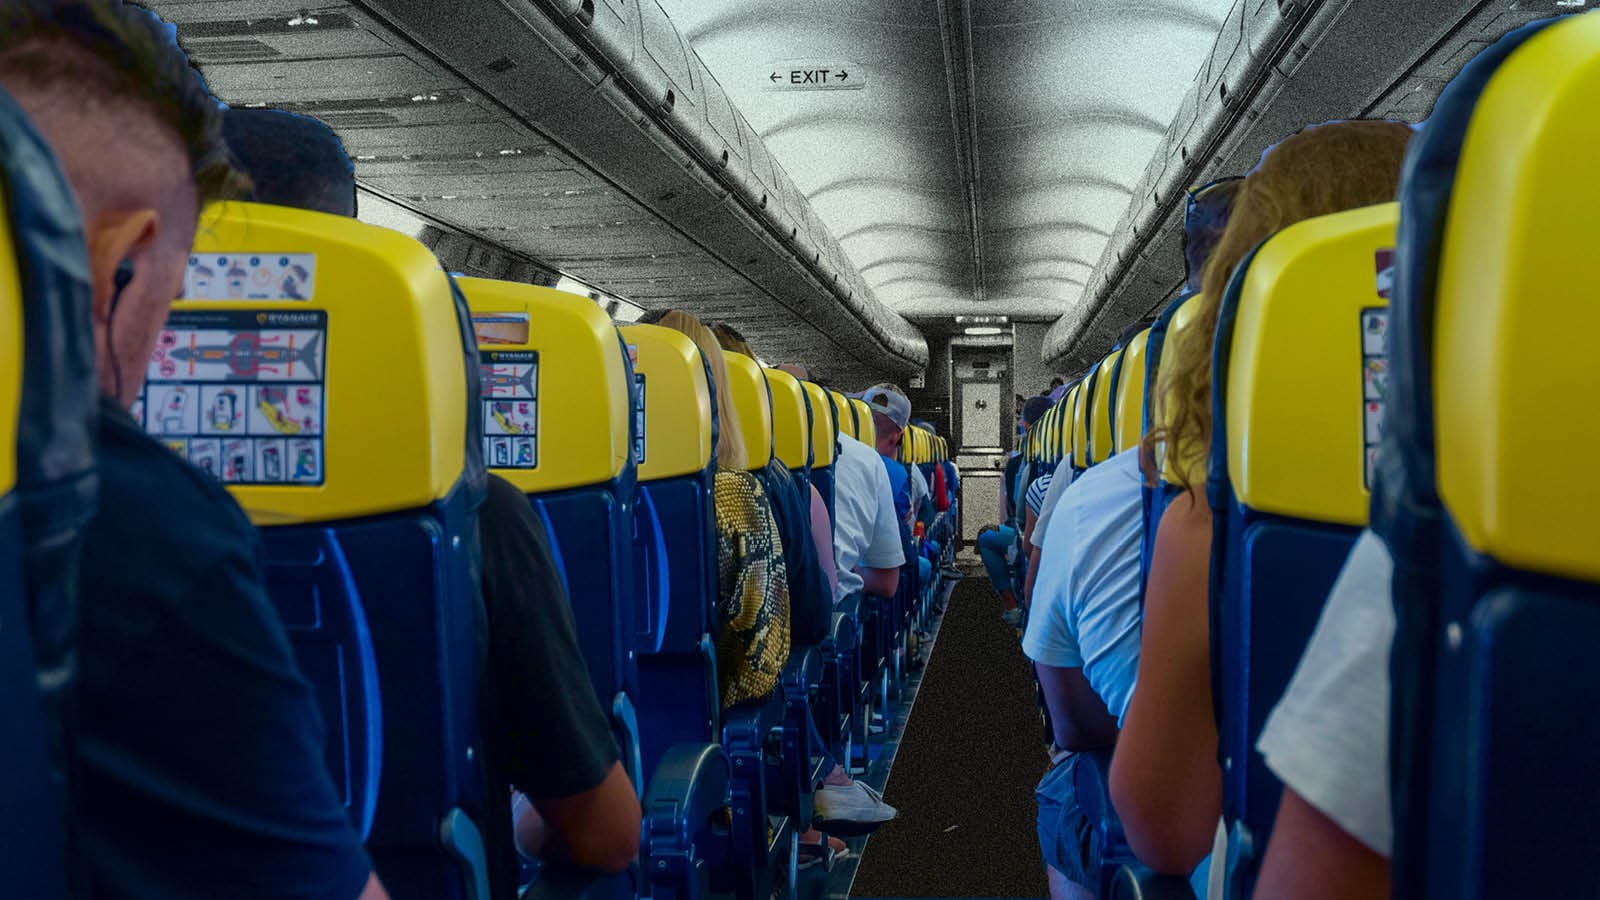 A photo looking down the aisle of an airplane during a packed flight.